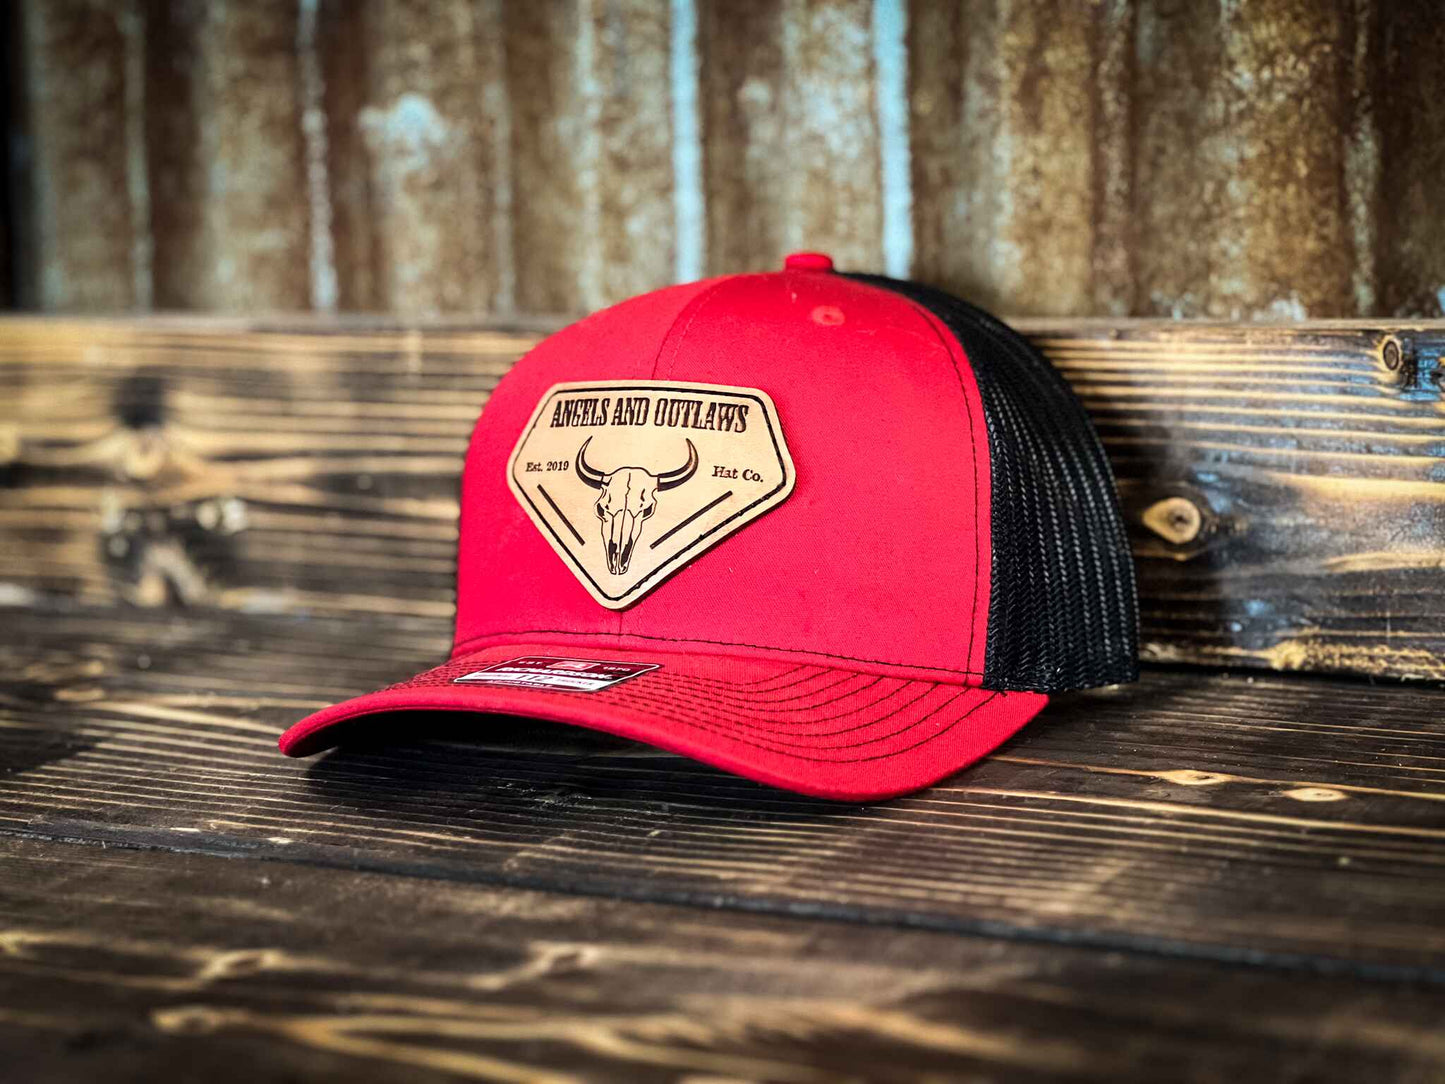 Red front black back Mesh back trucker hat with Angels and Outlaws name and a bison skull engraved on a leather patch